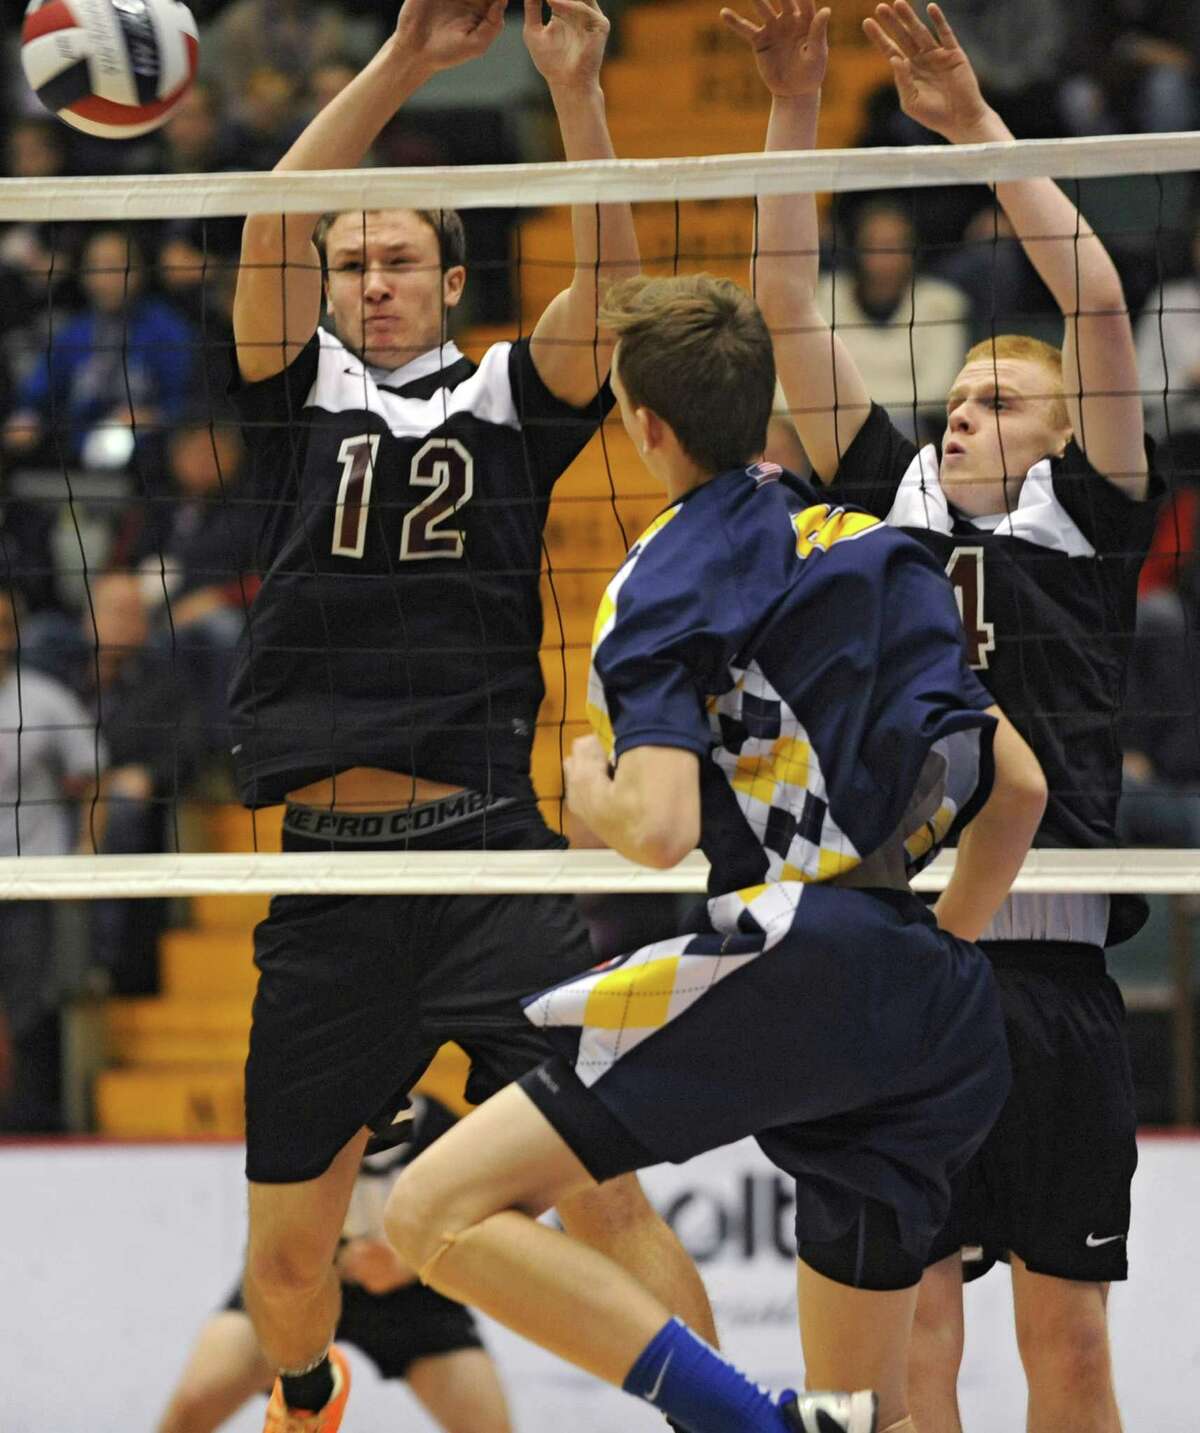 Austin Nydegger, left, and Ben Keppler, right, of Burnt Hills try to block the ball hit by Matt Erickson of Sachem during a state semifinals volleyball match on Friday, Nov. 15, 2013 in Glens Falls, N.Y. (Lori Van Buren / Times Union)